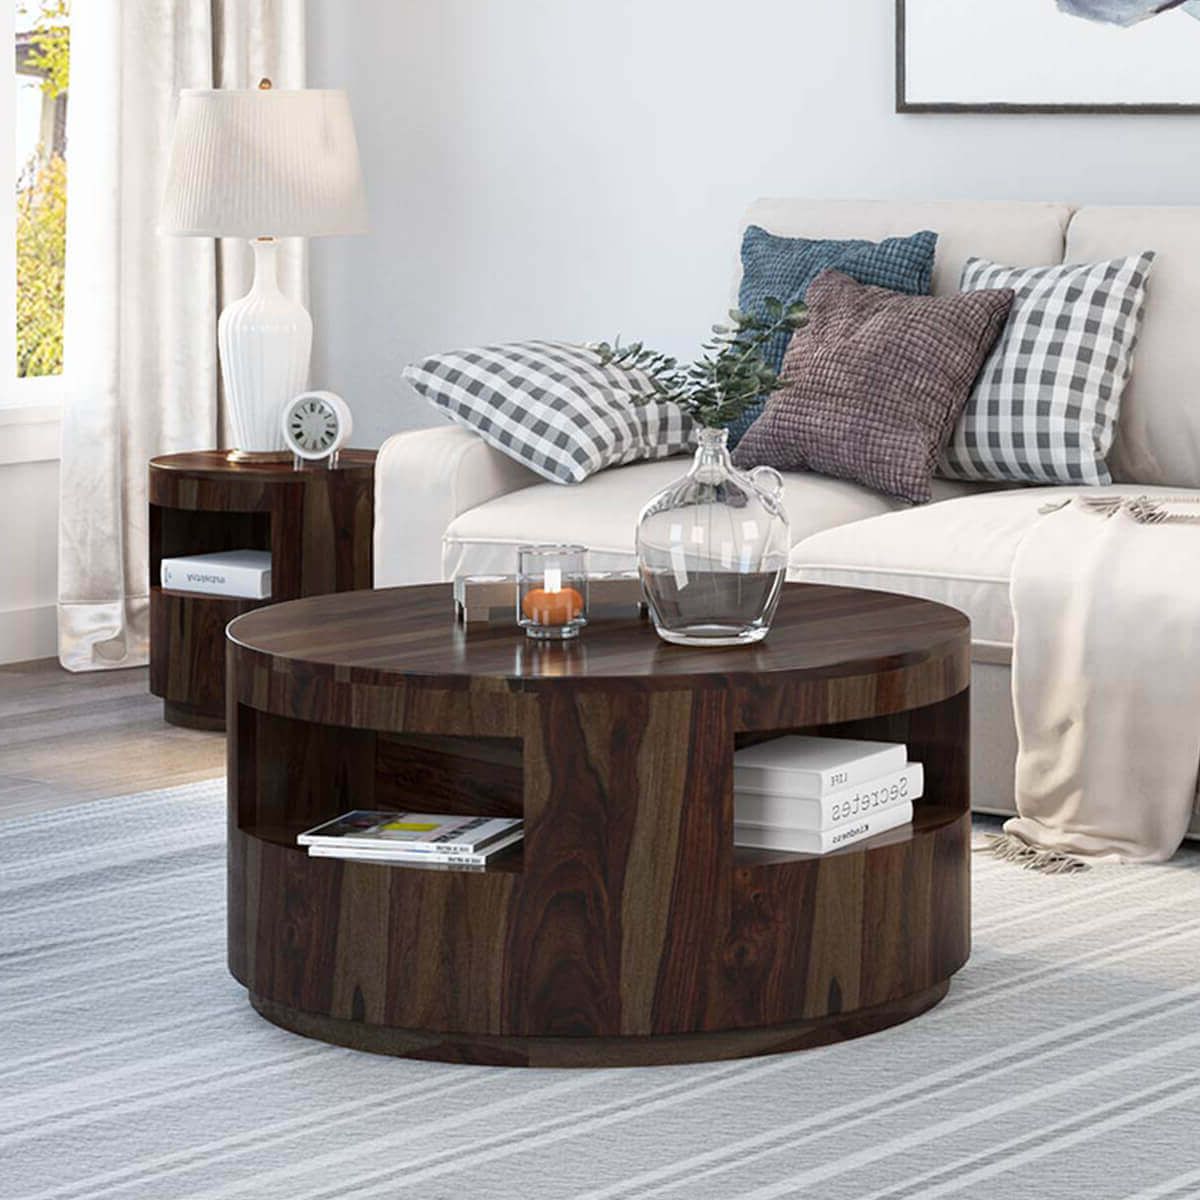 Wood Coffee Tables In Famous Ladonia Rustic Solid Wood Round Coffee Table With Shelves (View 7 of 10)